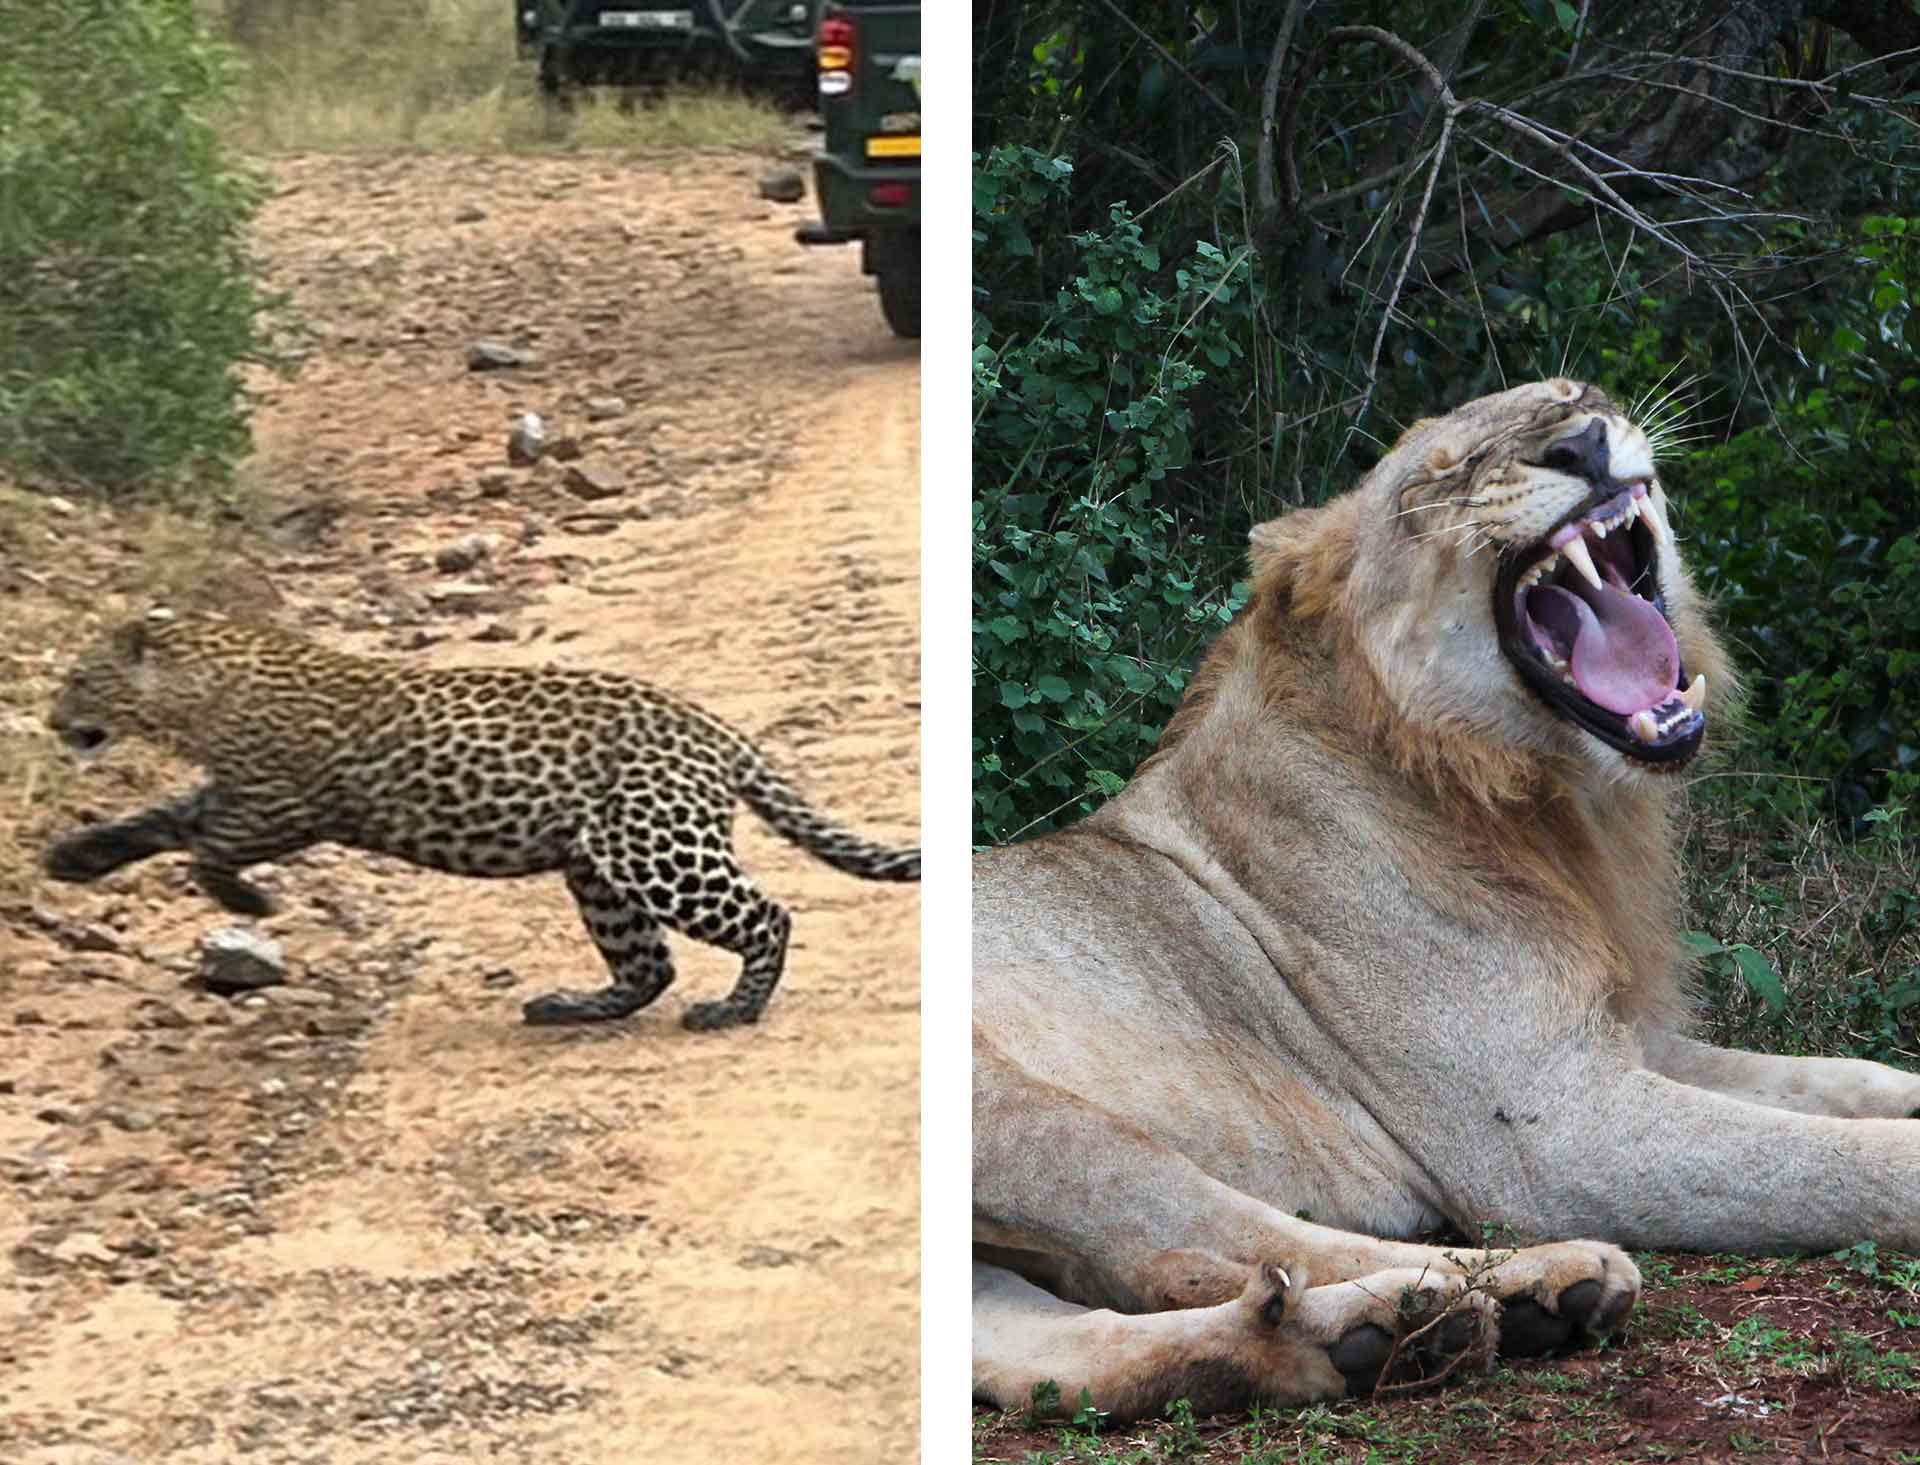 Photo: Left to Right: Spotting a leopard in Kruger National Park, South Africa. Catching sight of a young lion at Hluhluwe Game Reserve in South Africa.